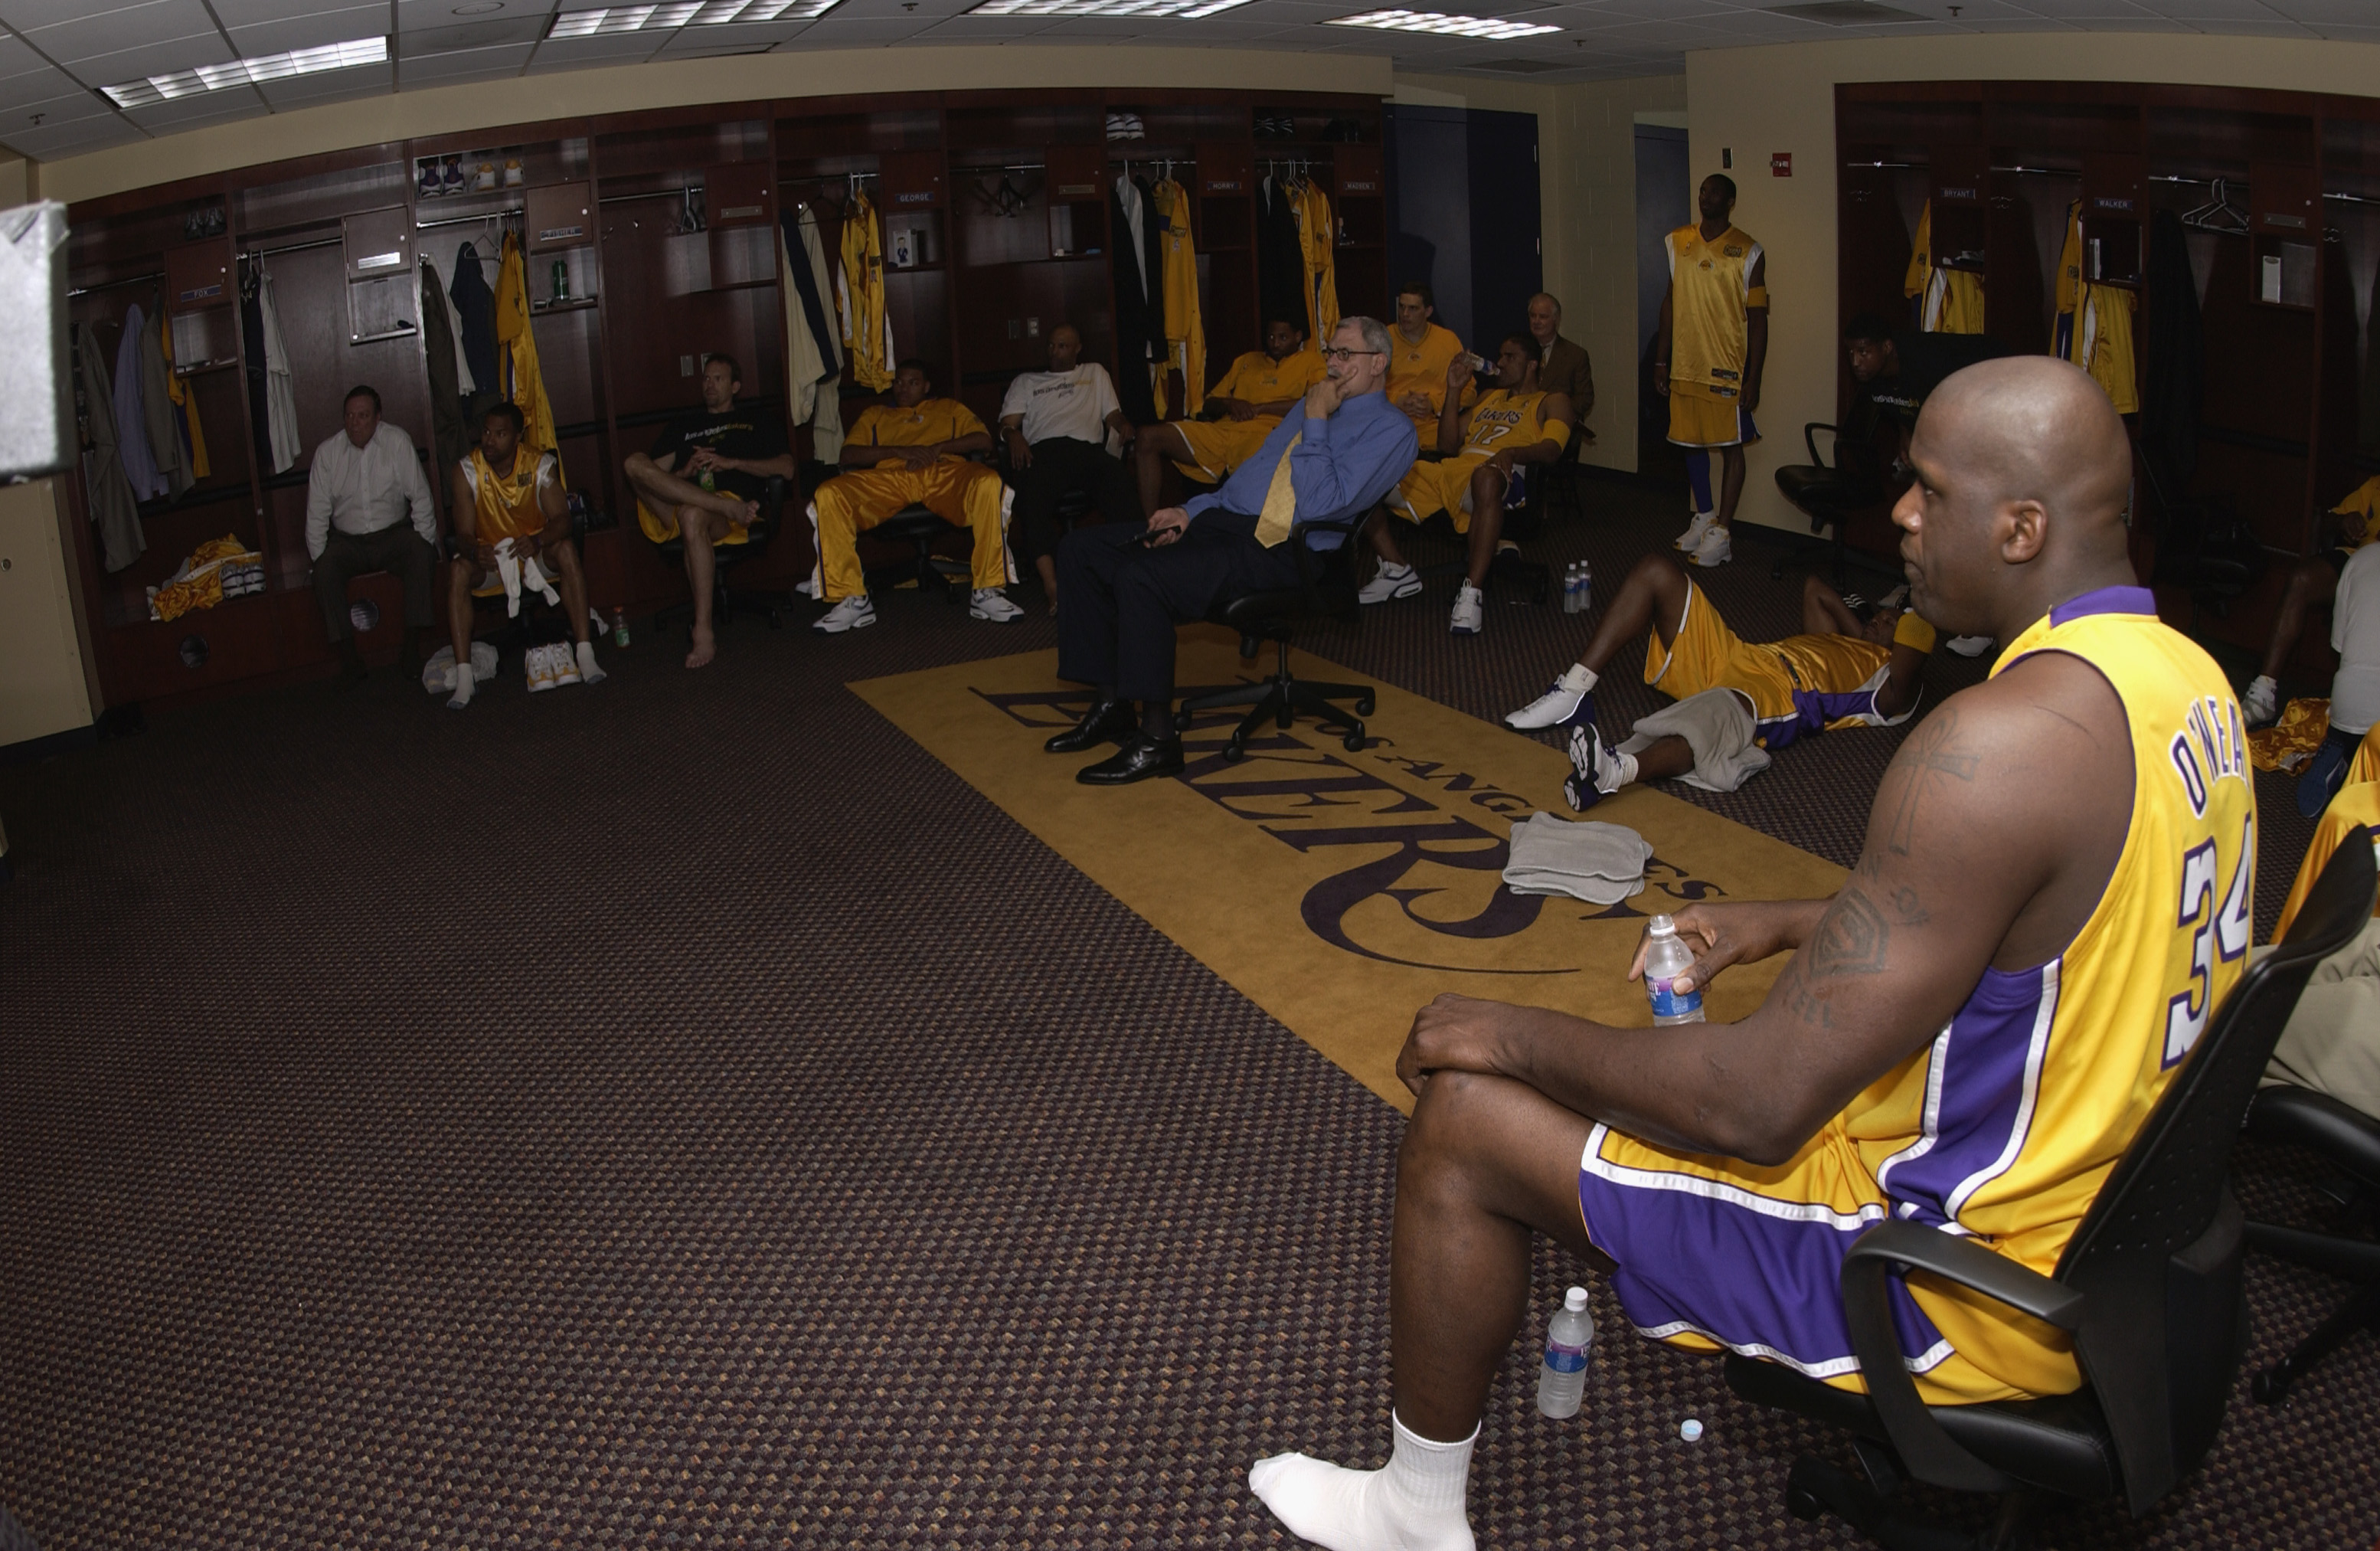 Lakers coach reveals Shaquille ONeal once showed up to 